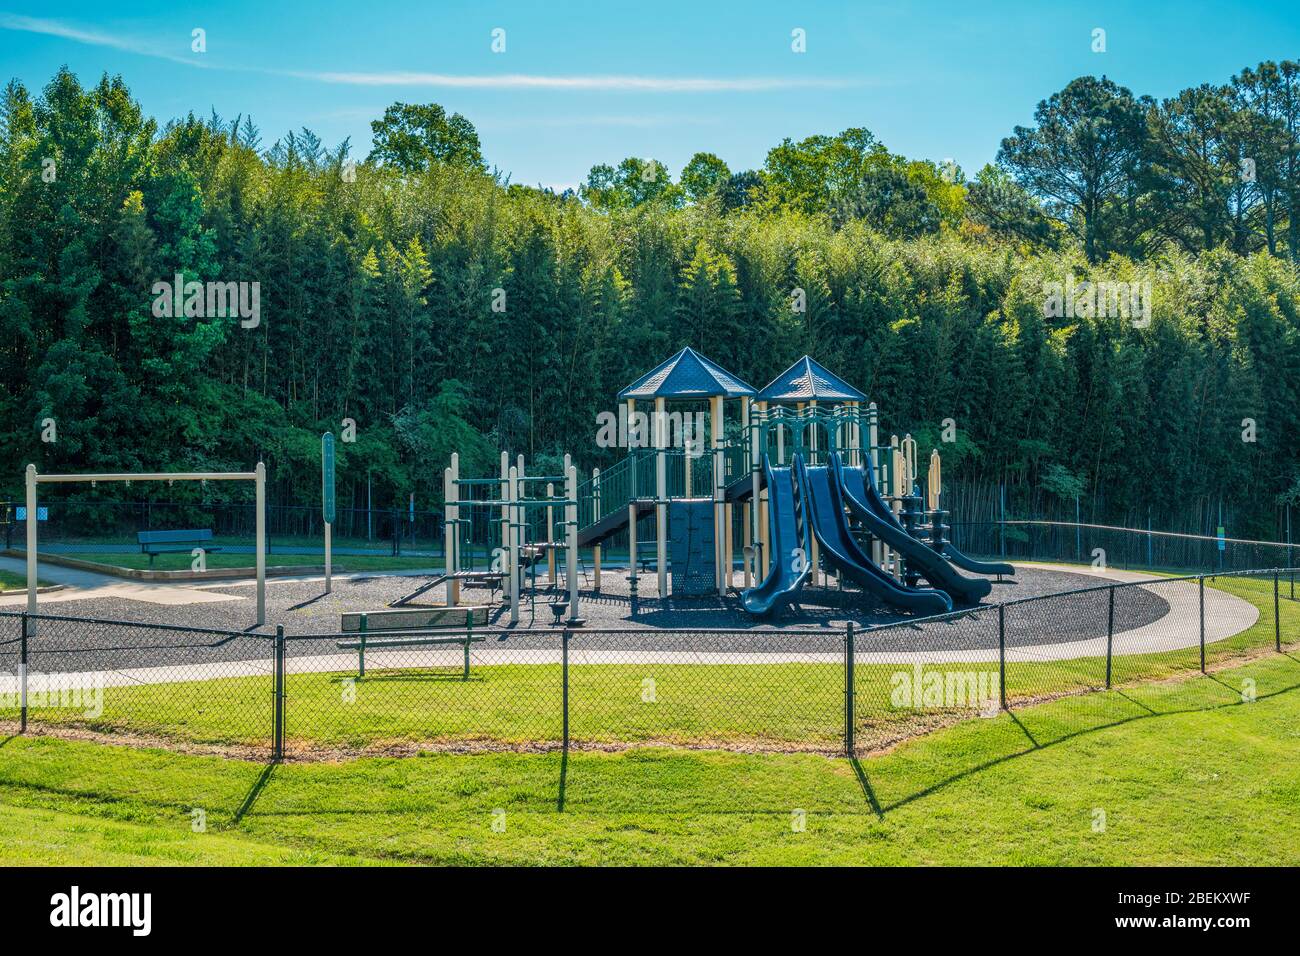 A quiet and empty playground closed and locked up due to the coronavirus pandemic stay at home restrictions on a sunny day in springtime Stock Photo